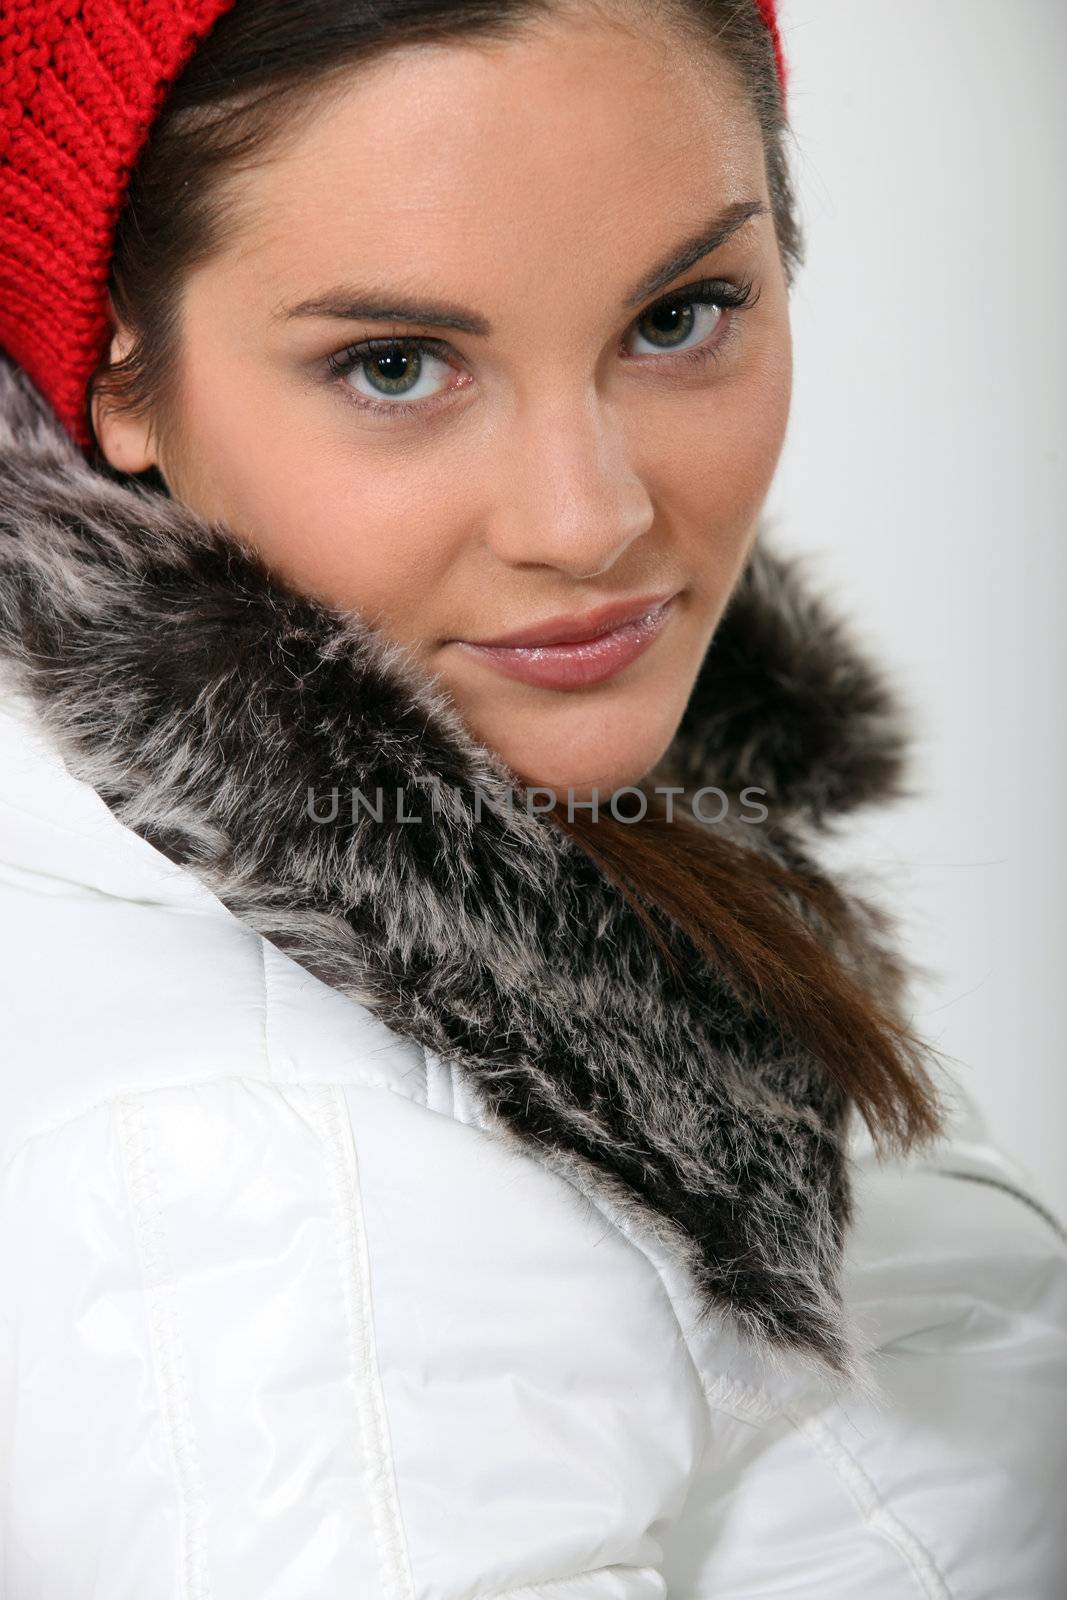 Pretty young woman wearing coat with fur by phovoir